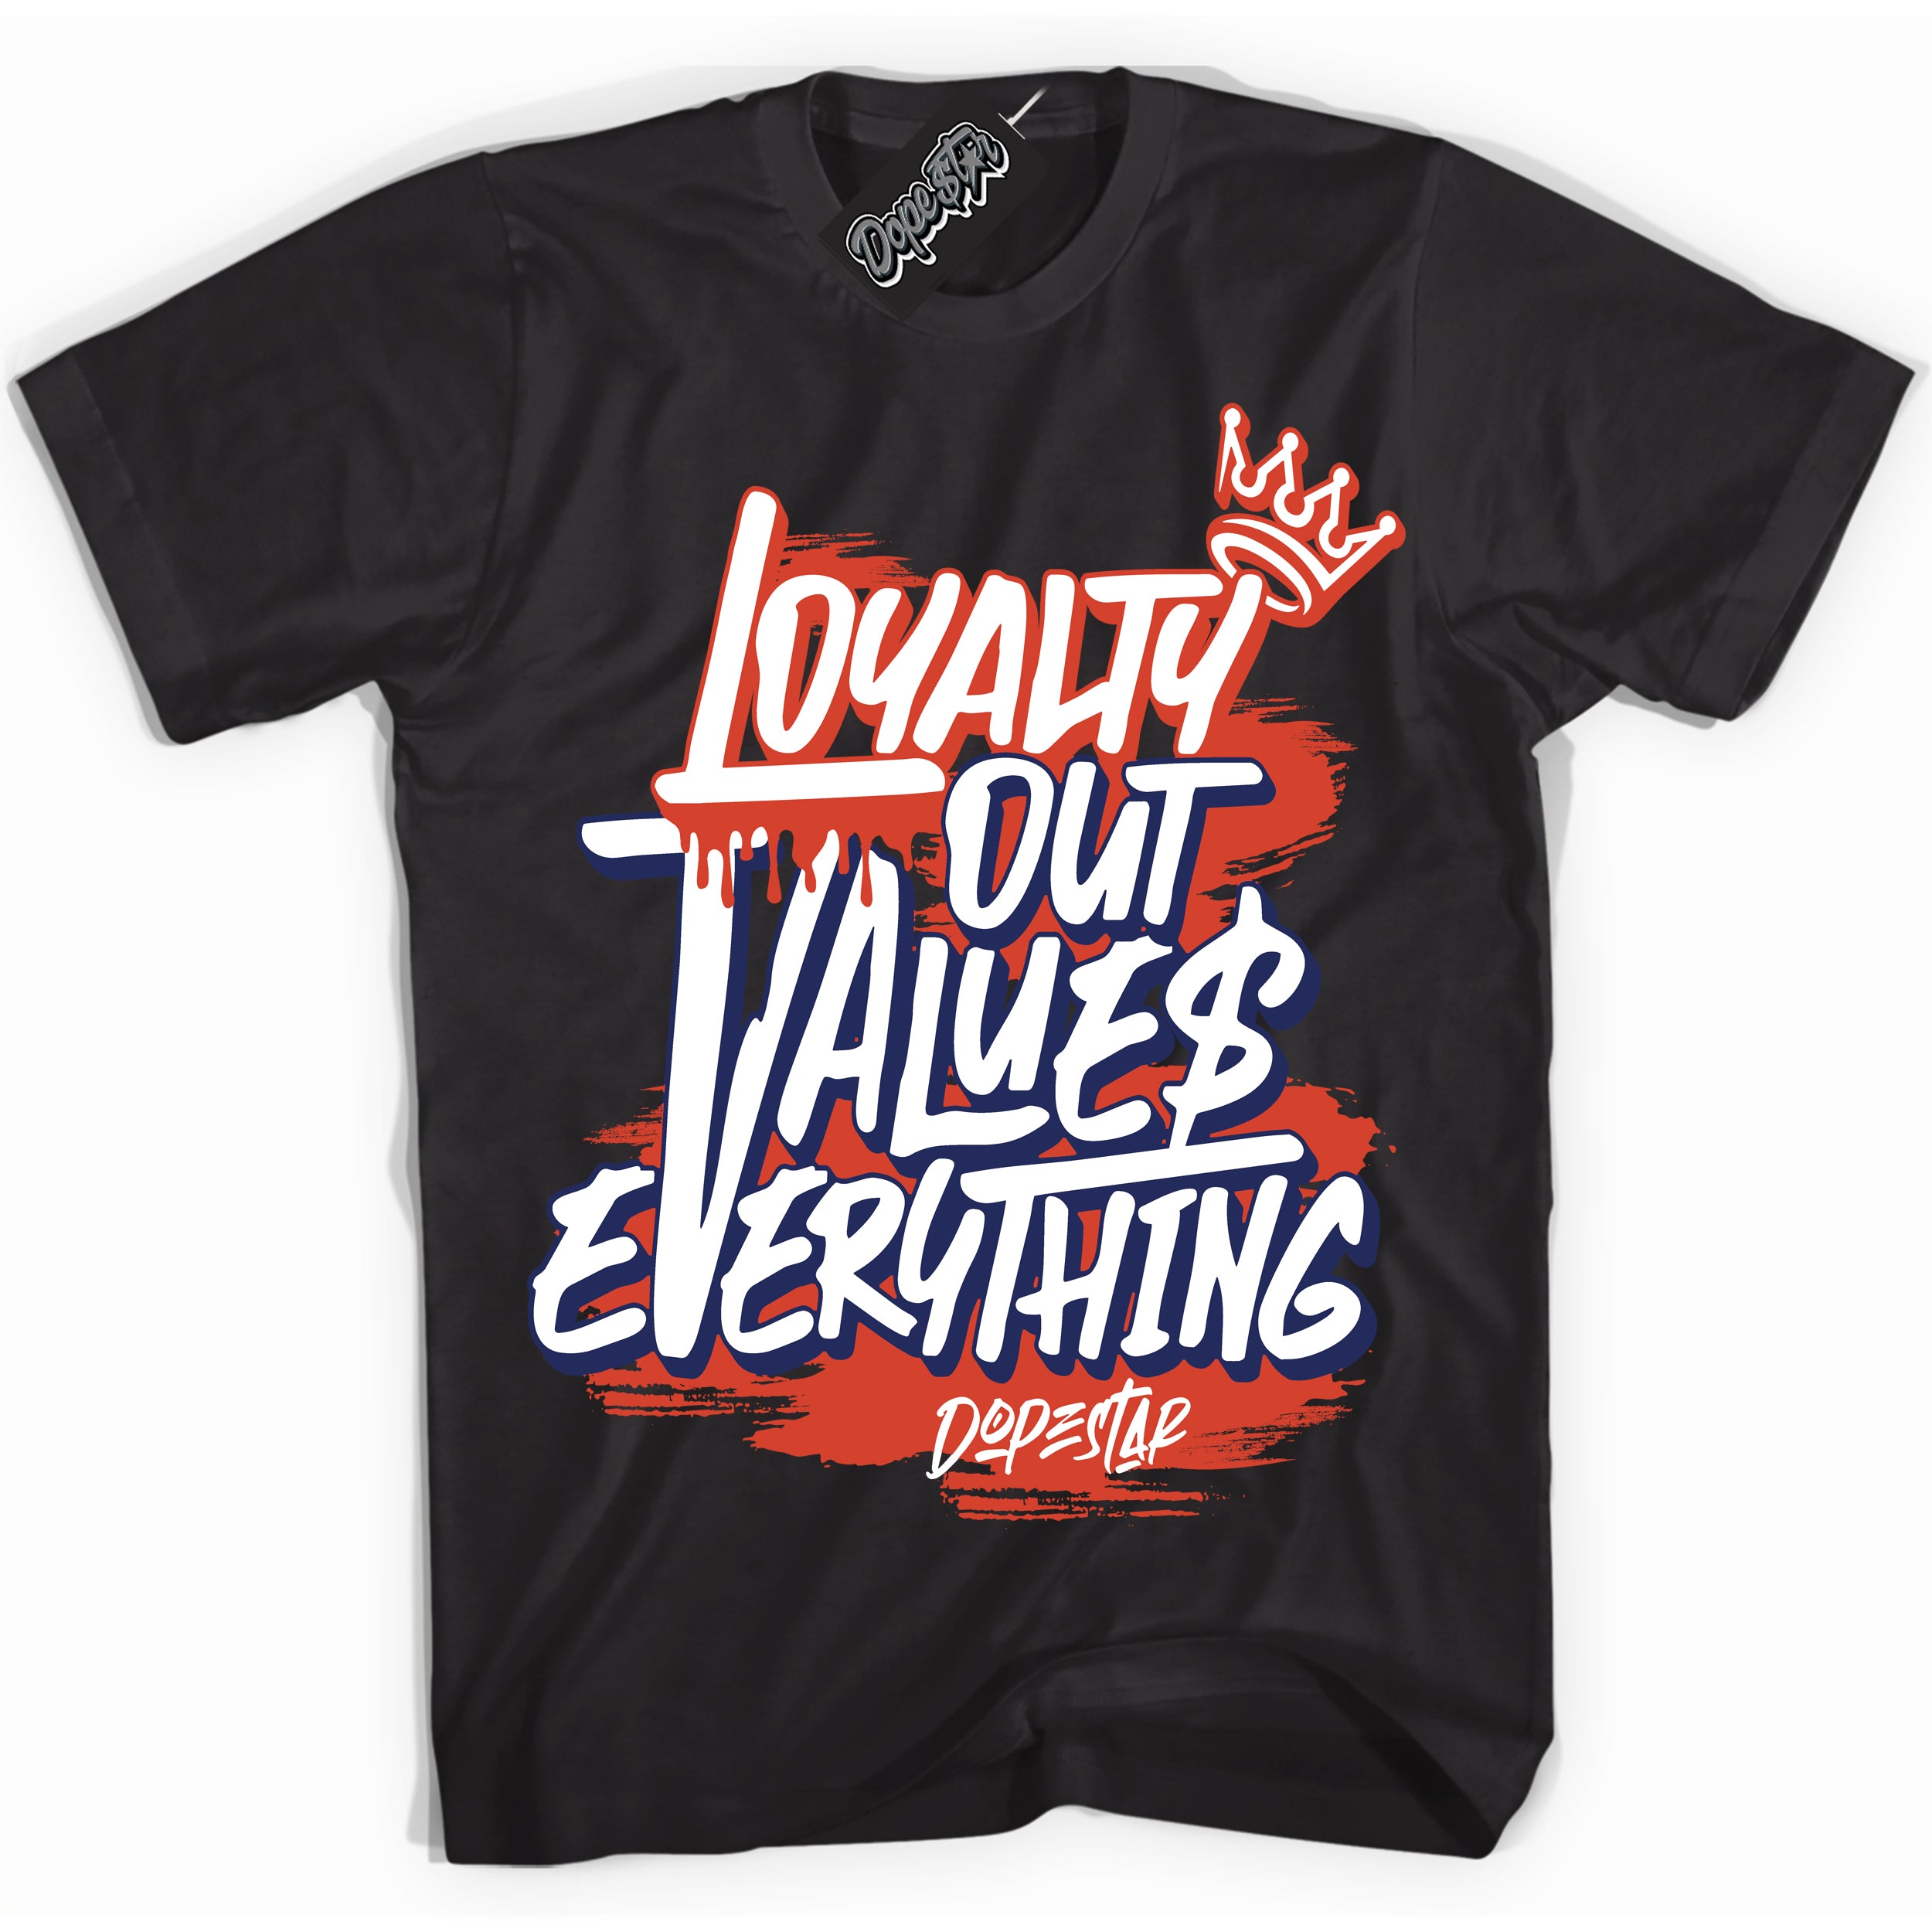 Cool Black Shirt with “ Loyalty Out Values Everything” design that perfectly matches Knicks Sneakers.